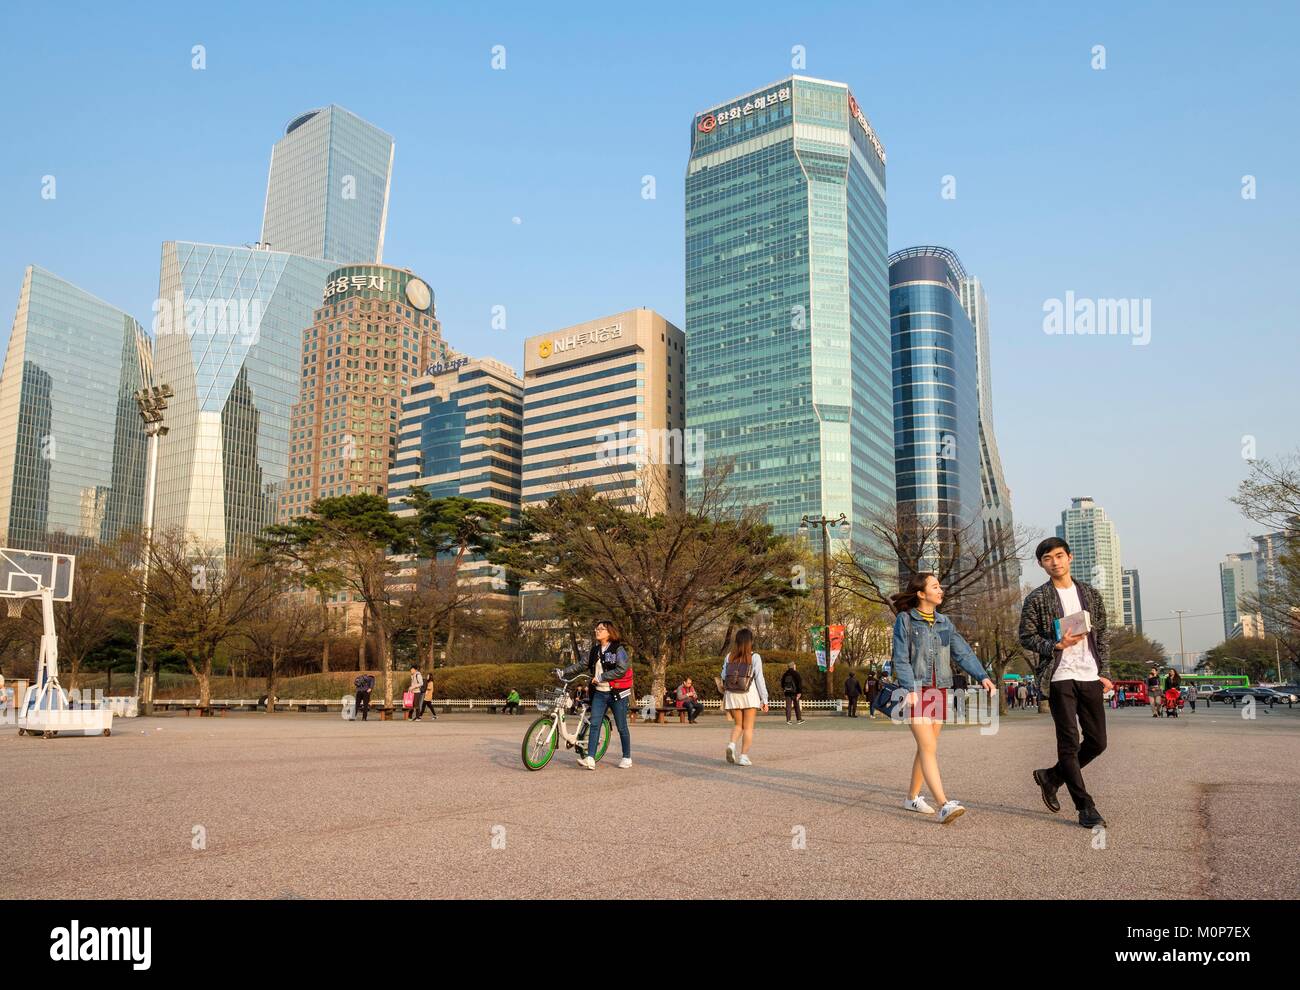 South Korea,Seoul,Yeongdeungpo-gu district,Yeouido is an island on the Han river and Seoul's main finance and investment banking district,Yeouido Park Stock Photo